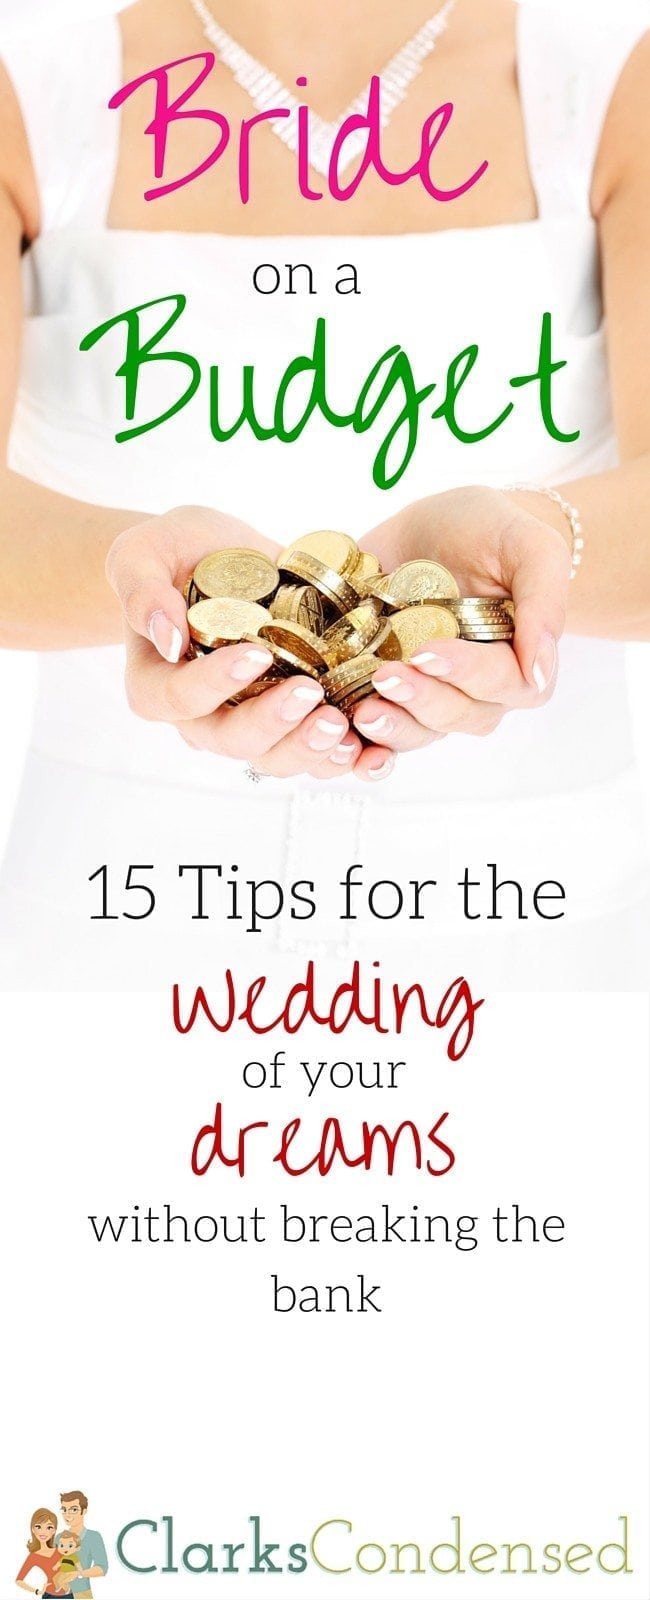 Have the wedding of your dreams without going broke - here are 15 tips for a bride on a budget!